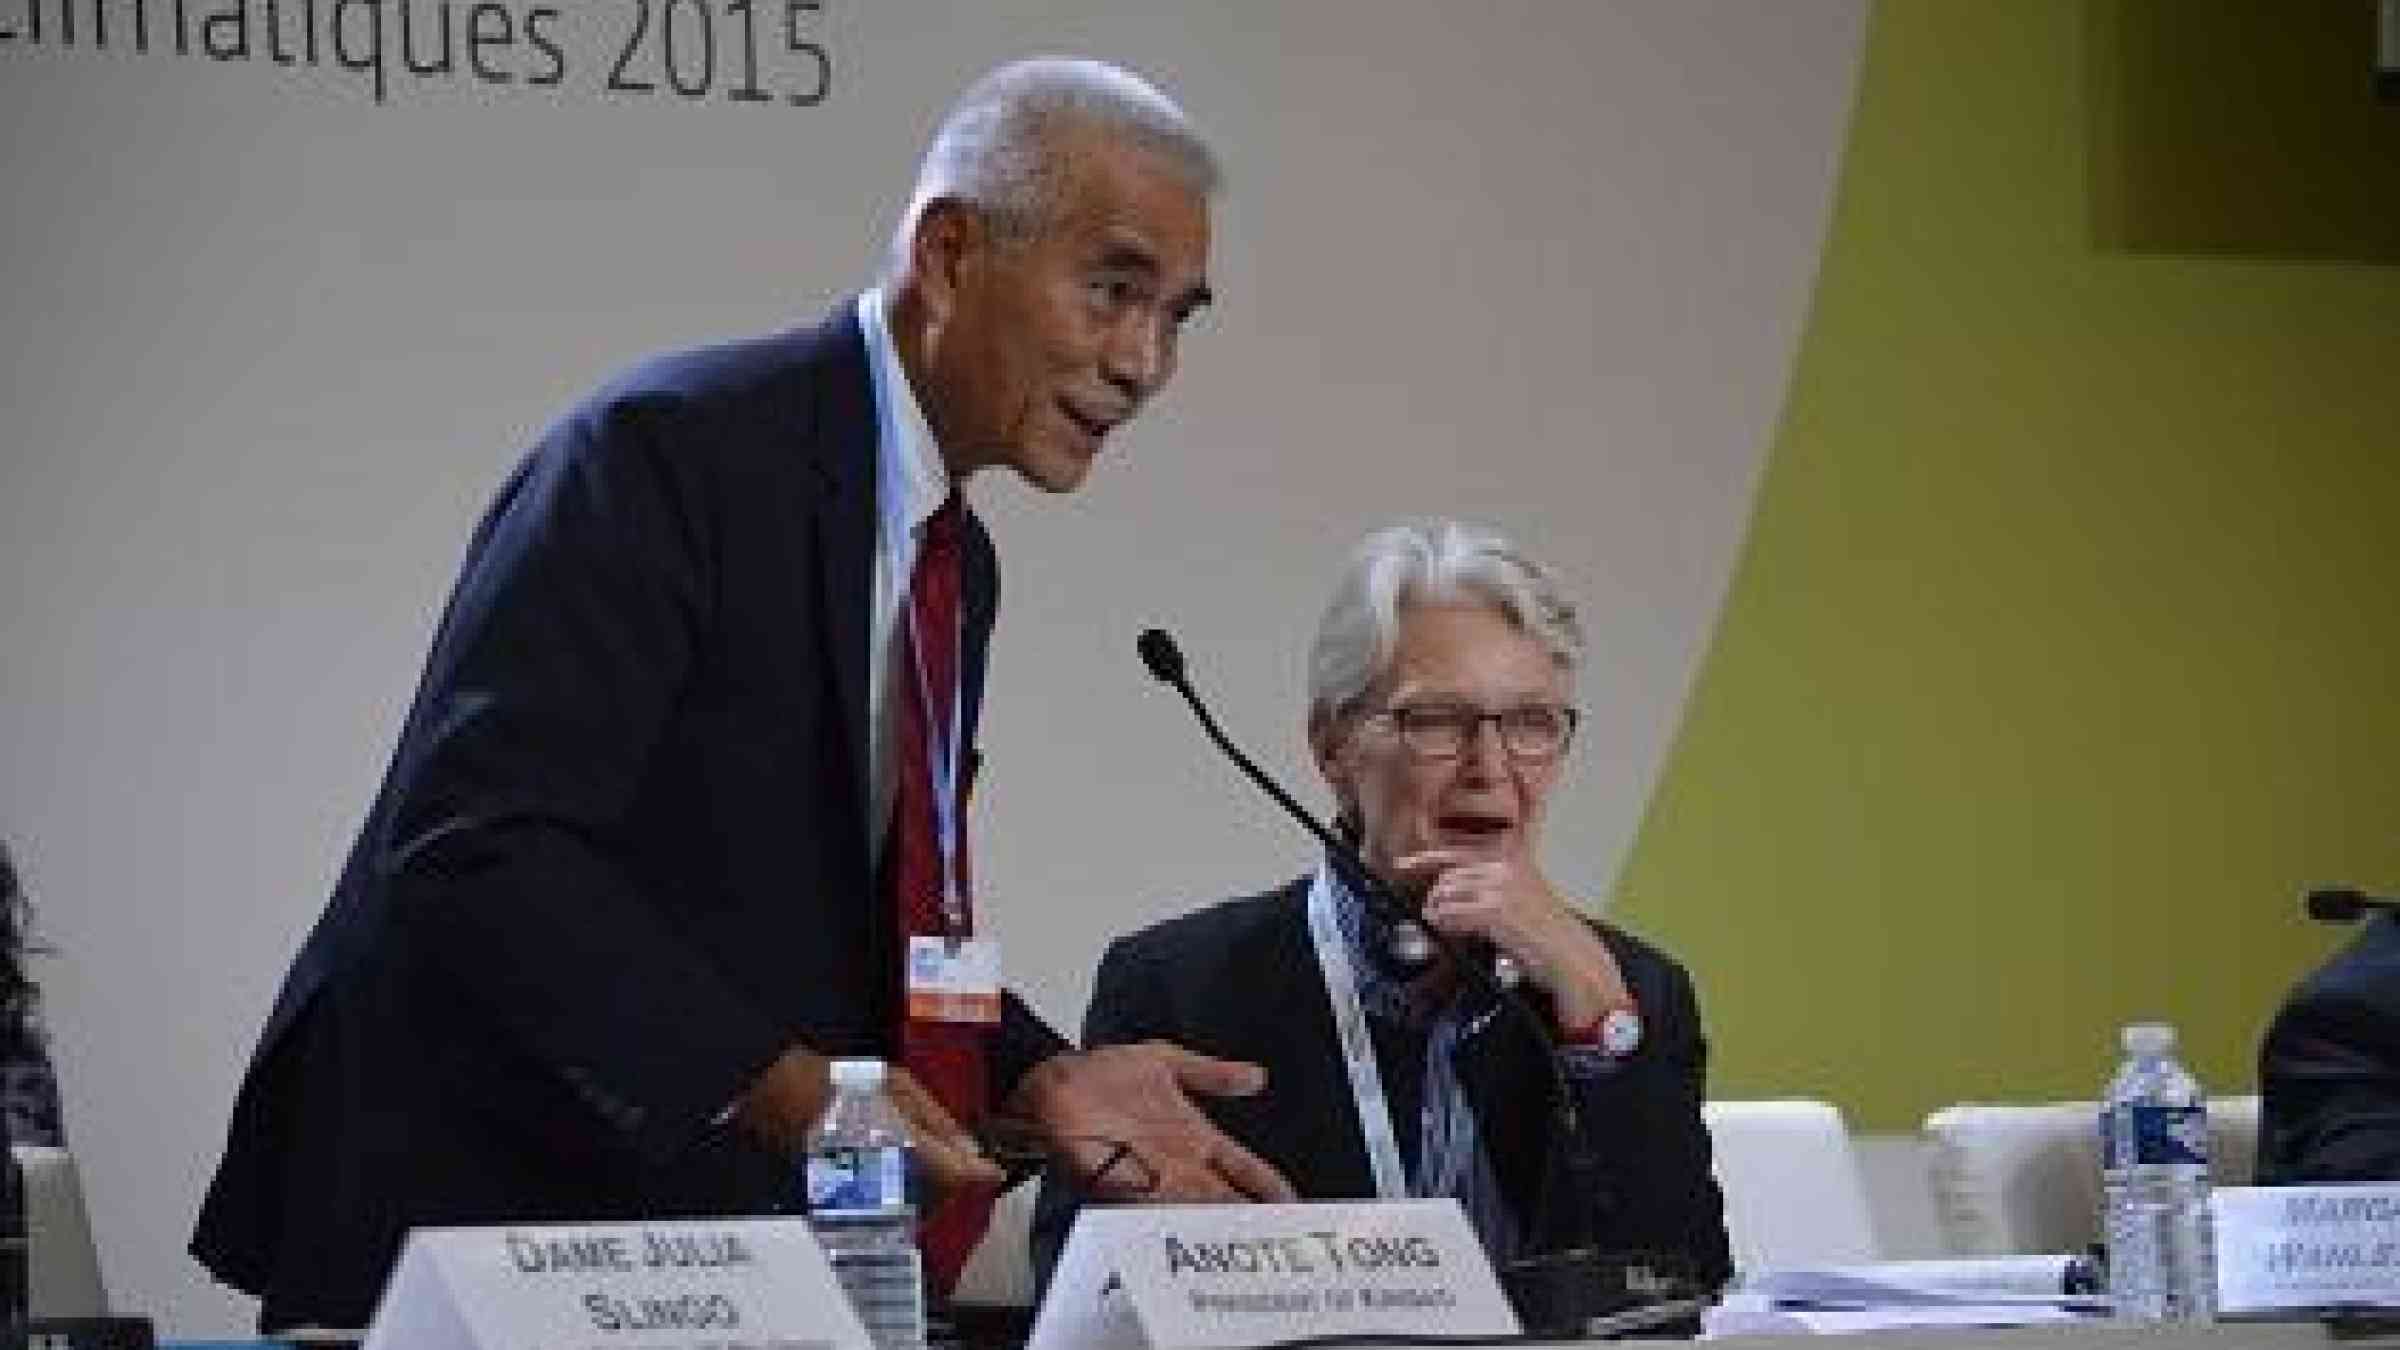 President Anote Tong of Kiribati and Margareta Wahlström, head of UNISDR, shared the podium at Tuesday's COP21 event on the Sendai Framework for Disaster Risk Reduction (Photo: UNISDR)